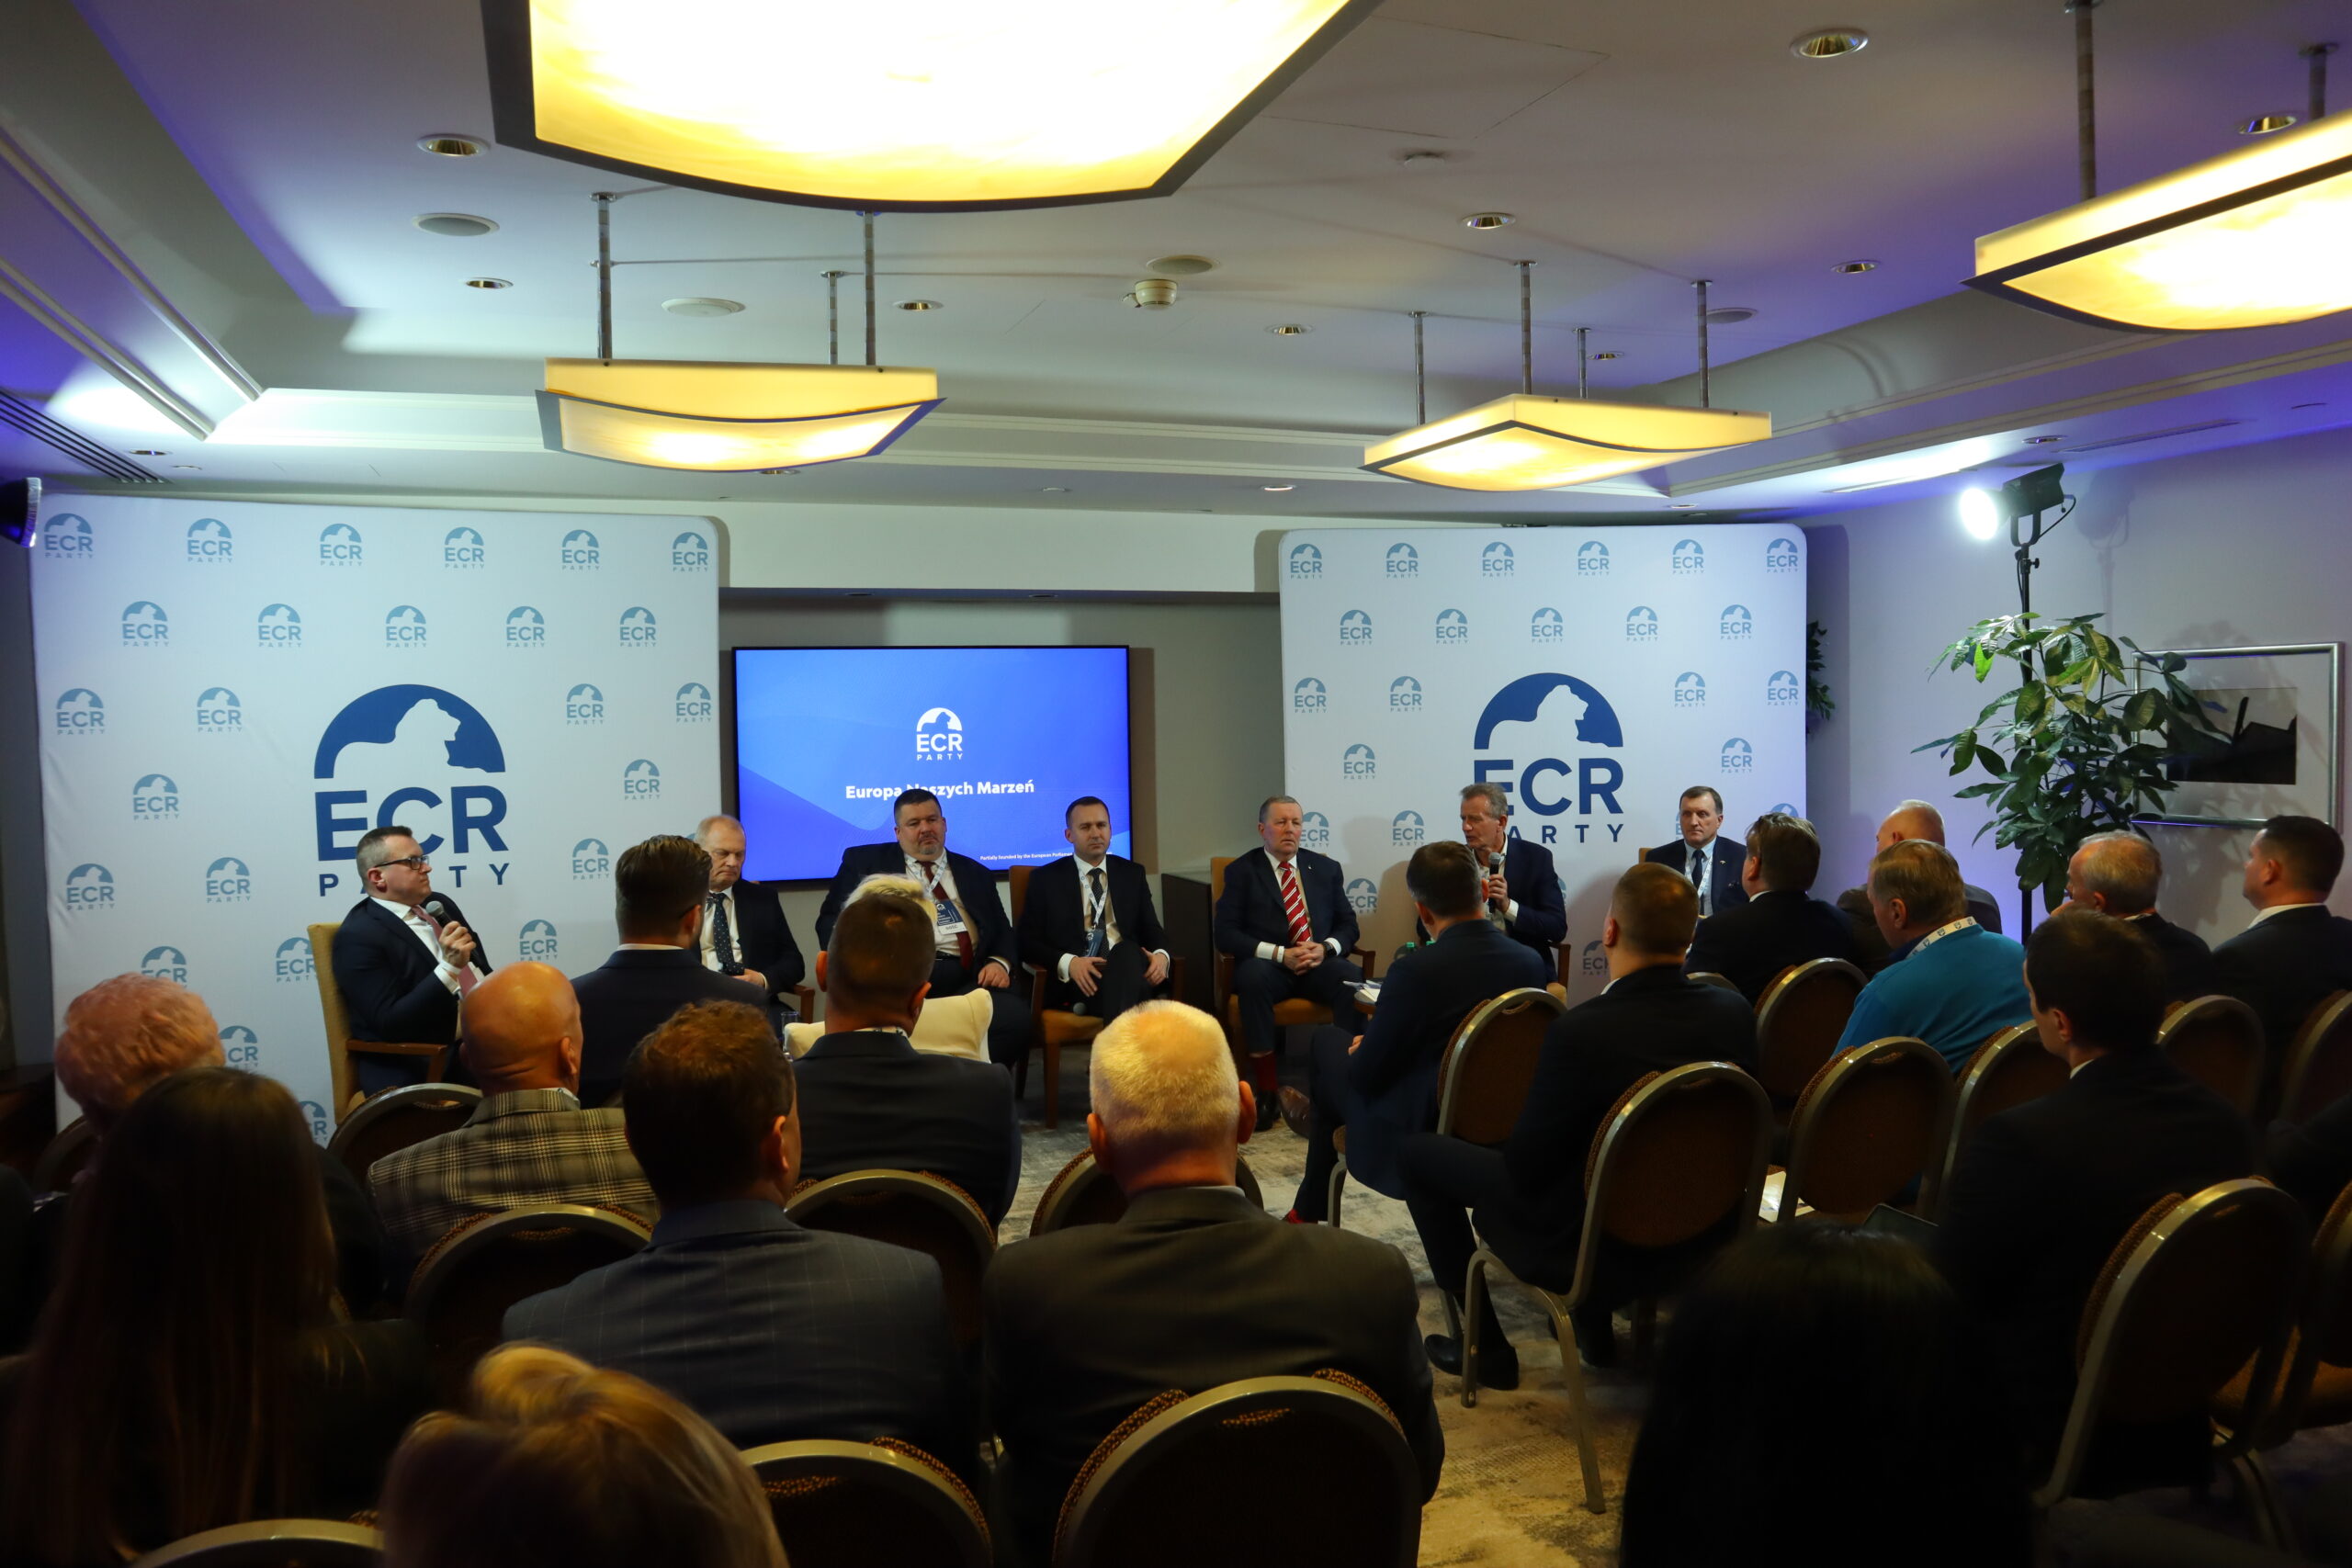 “Europe of our dreams”: Yaroslav Romanchuk and Andrii Romanchuk became speakers at the ECR Party Warsaw Summit held in Warsaw